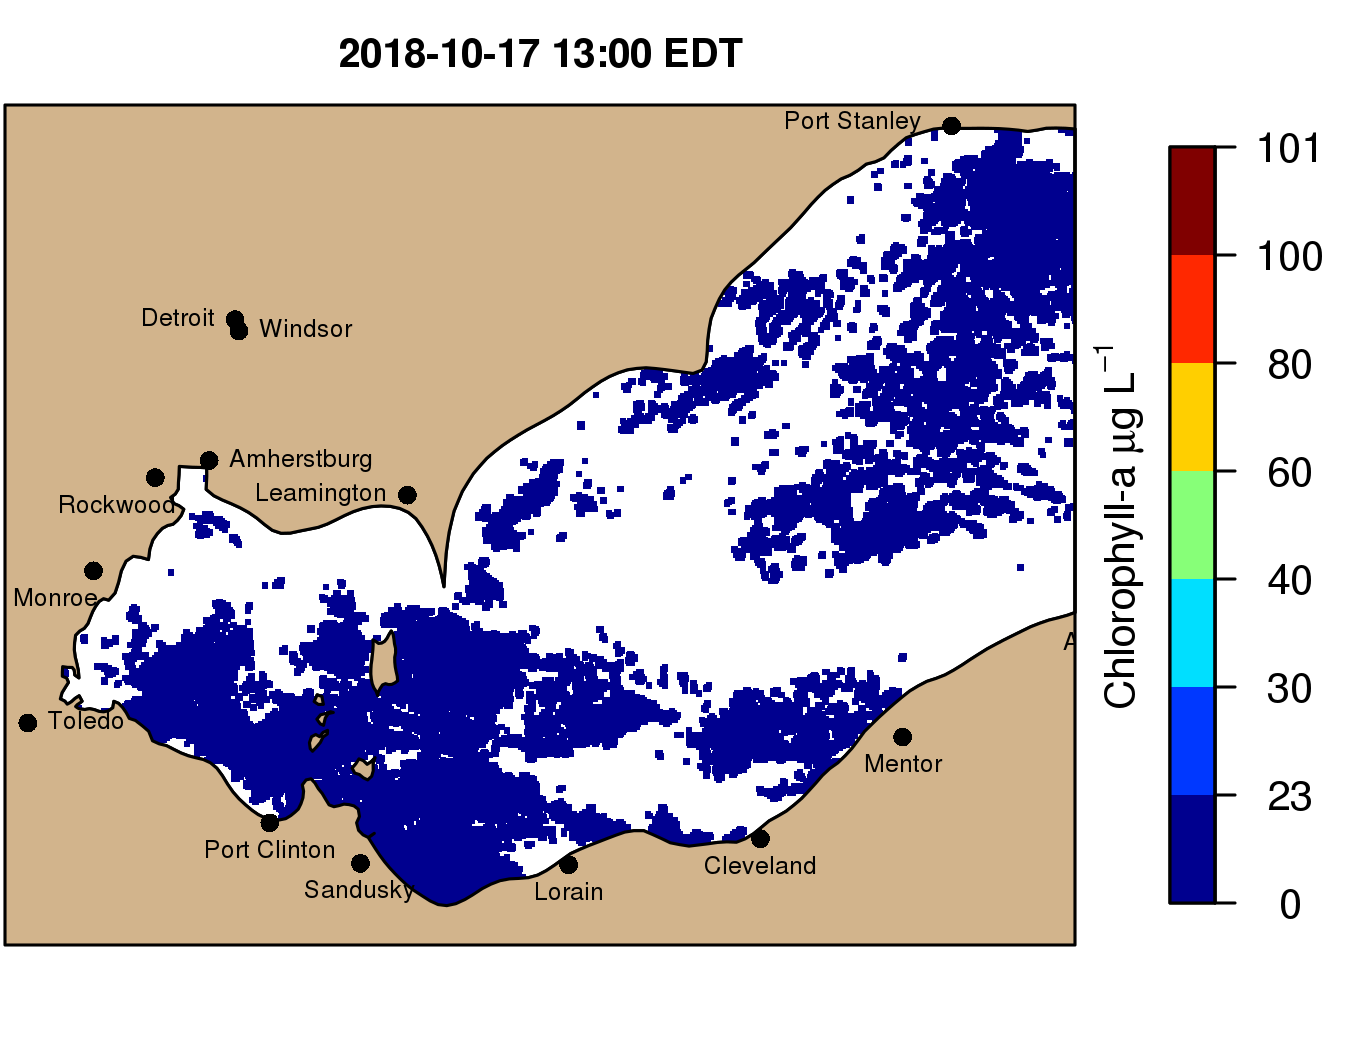 Latest HAB extent analysis used to update the bloom location in the HAB Tracker model. HAB extent analysis is provided by NOAA HAB Operational Forecasting System, derived from NASA MODIS Aqua/Terra, or Copernicus Sentinal 3 satellite data.